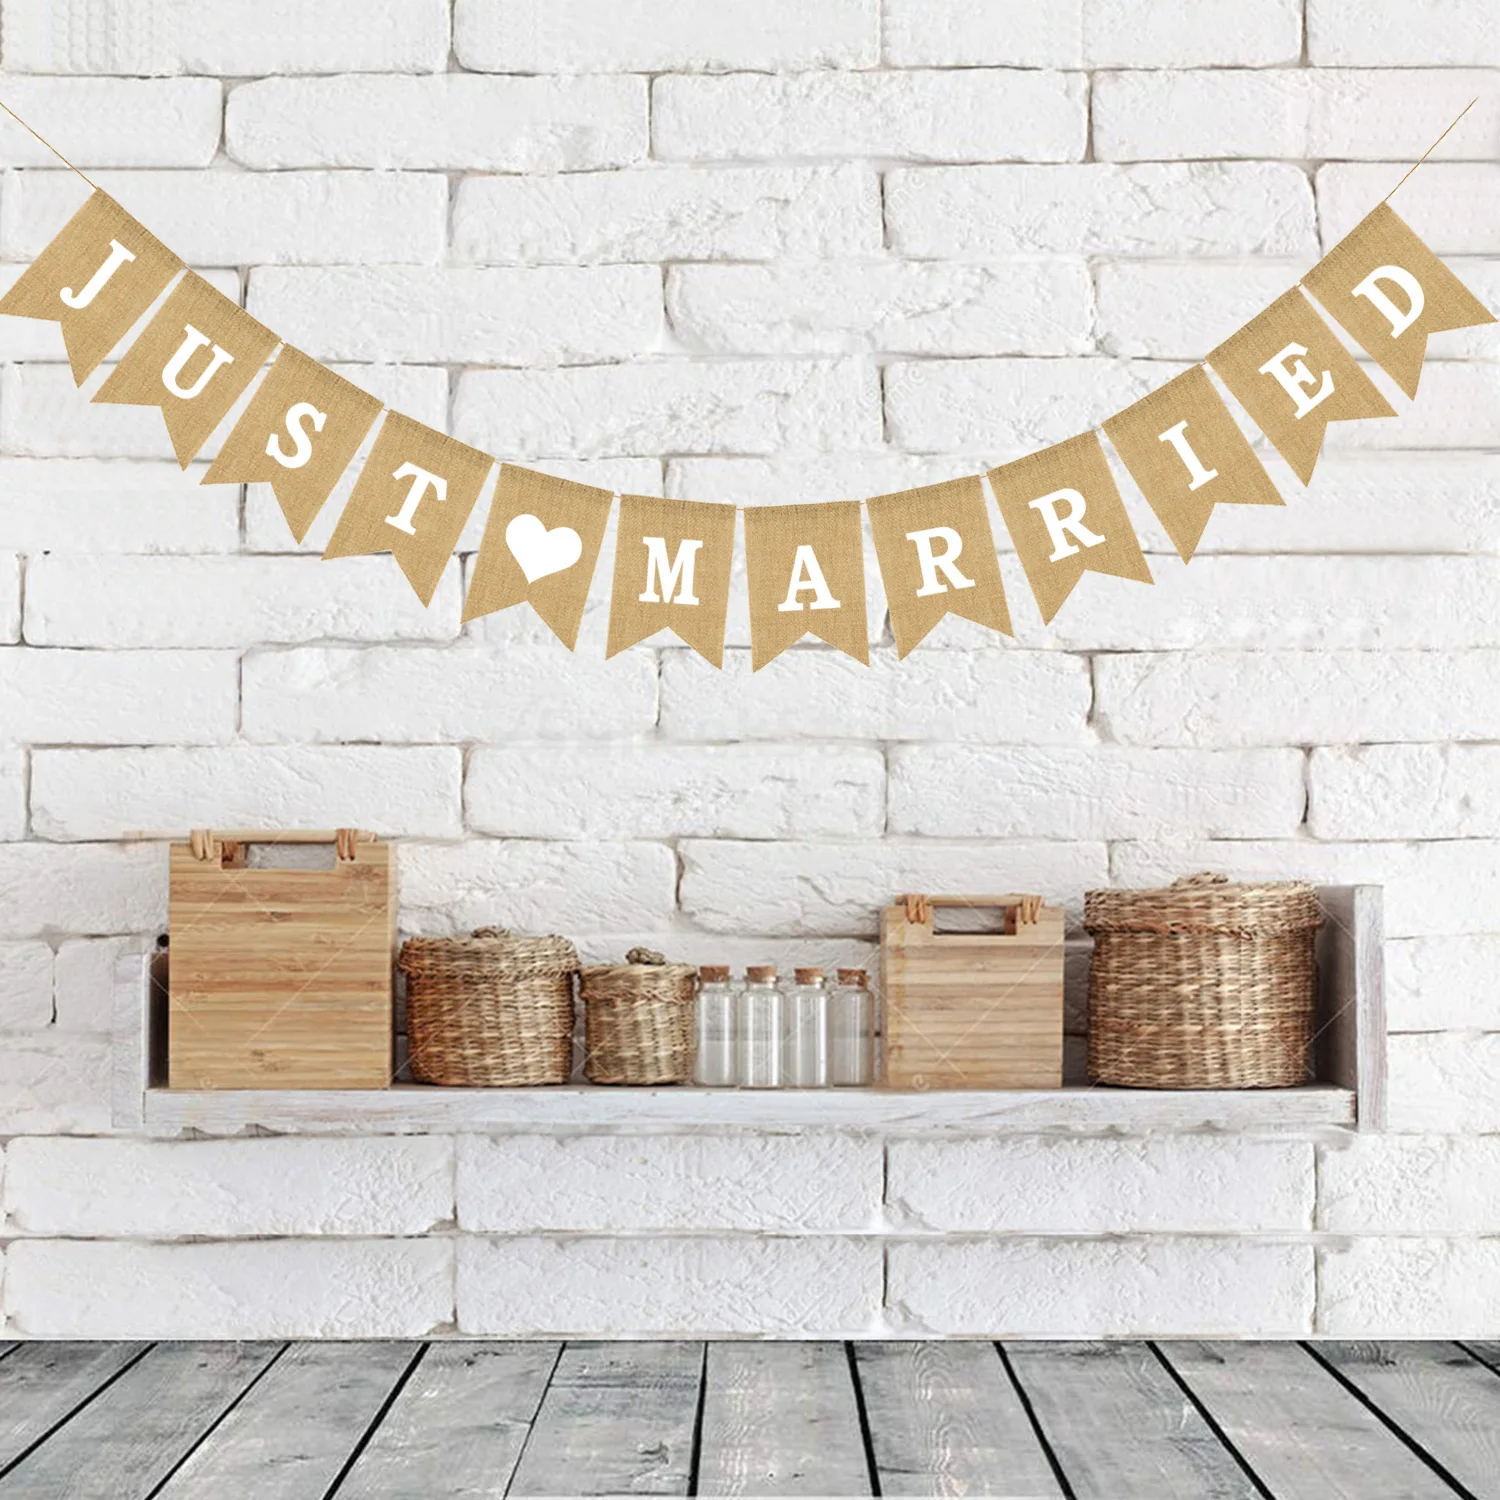 

HOT Jute Burlap Bunting Rustic Just Married Mr Mrs Wedding Banner Garland Party Flags Candy Bar Decoration Event Supplies